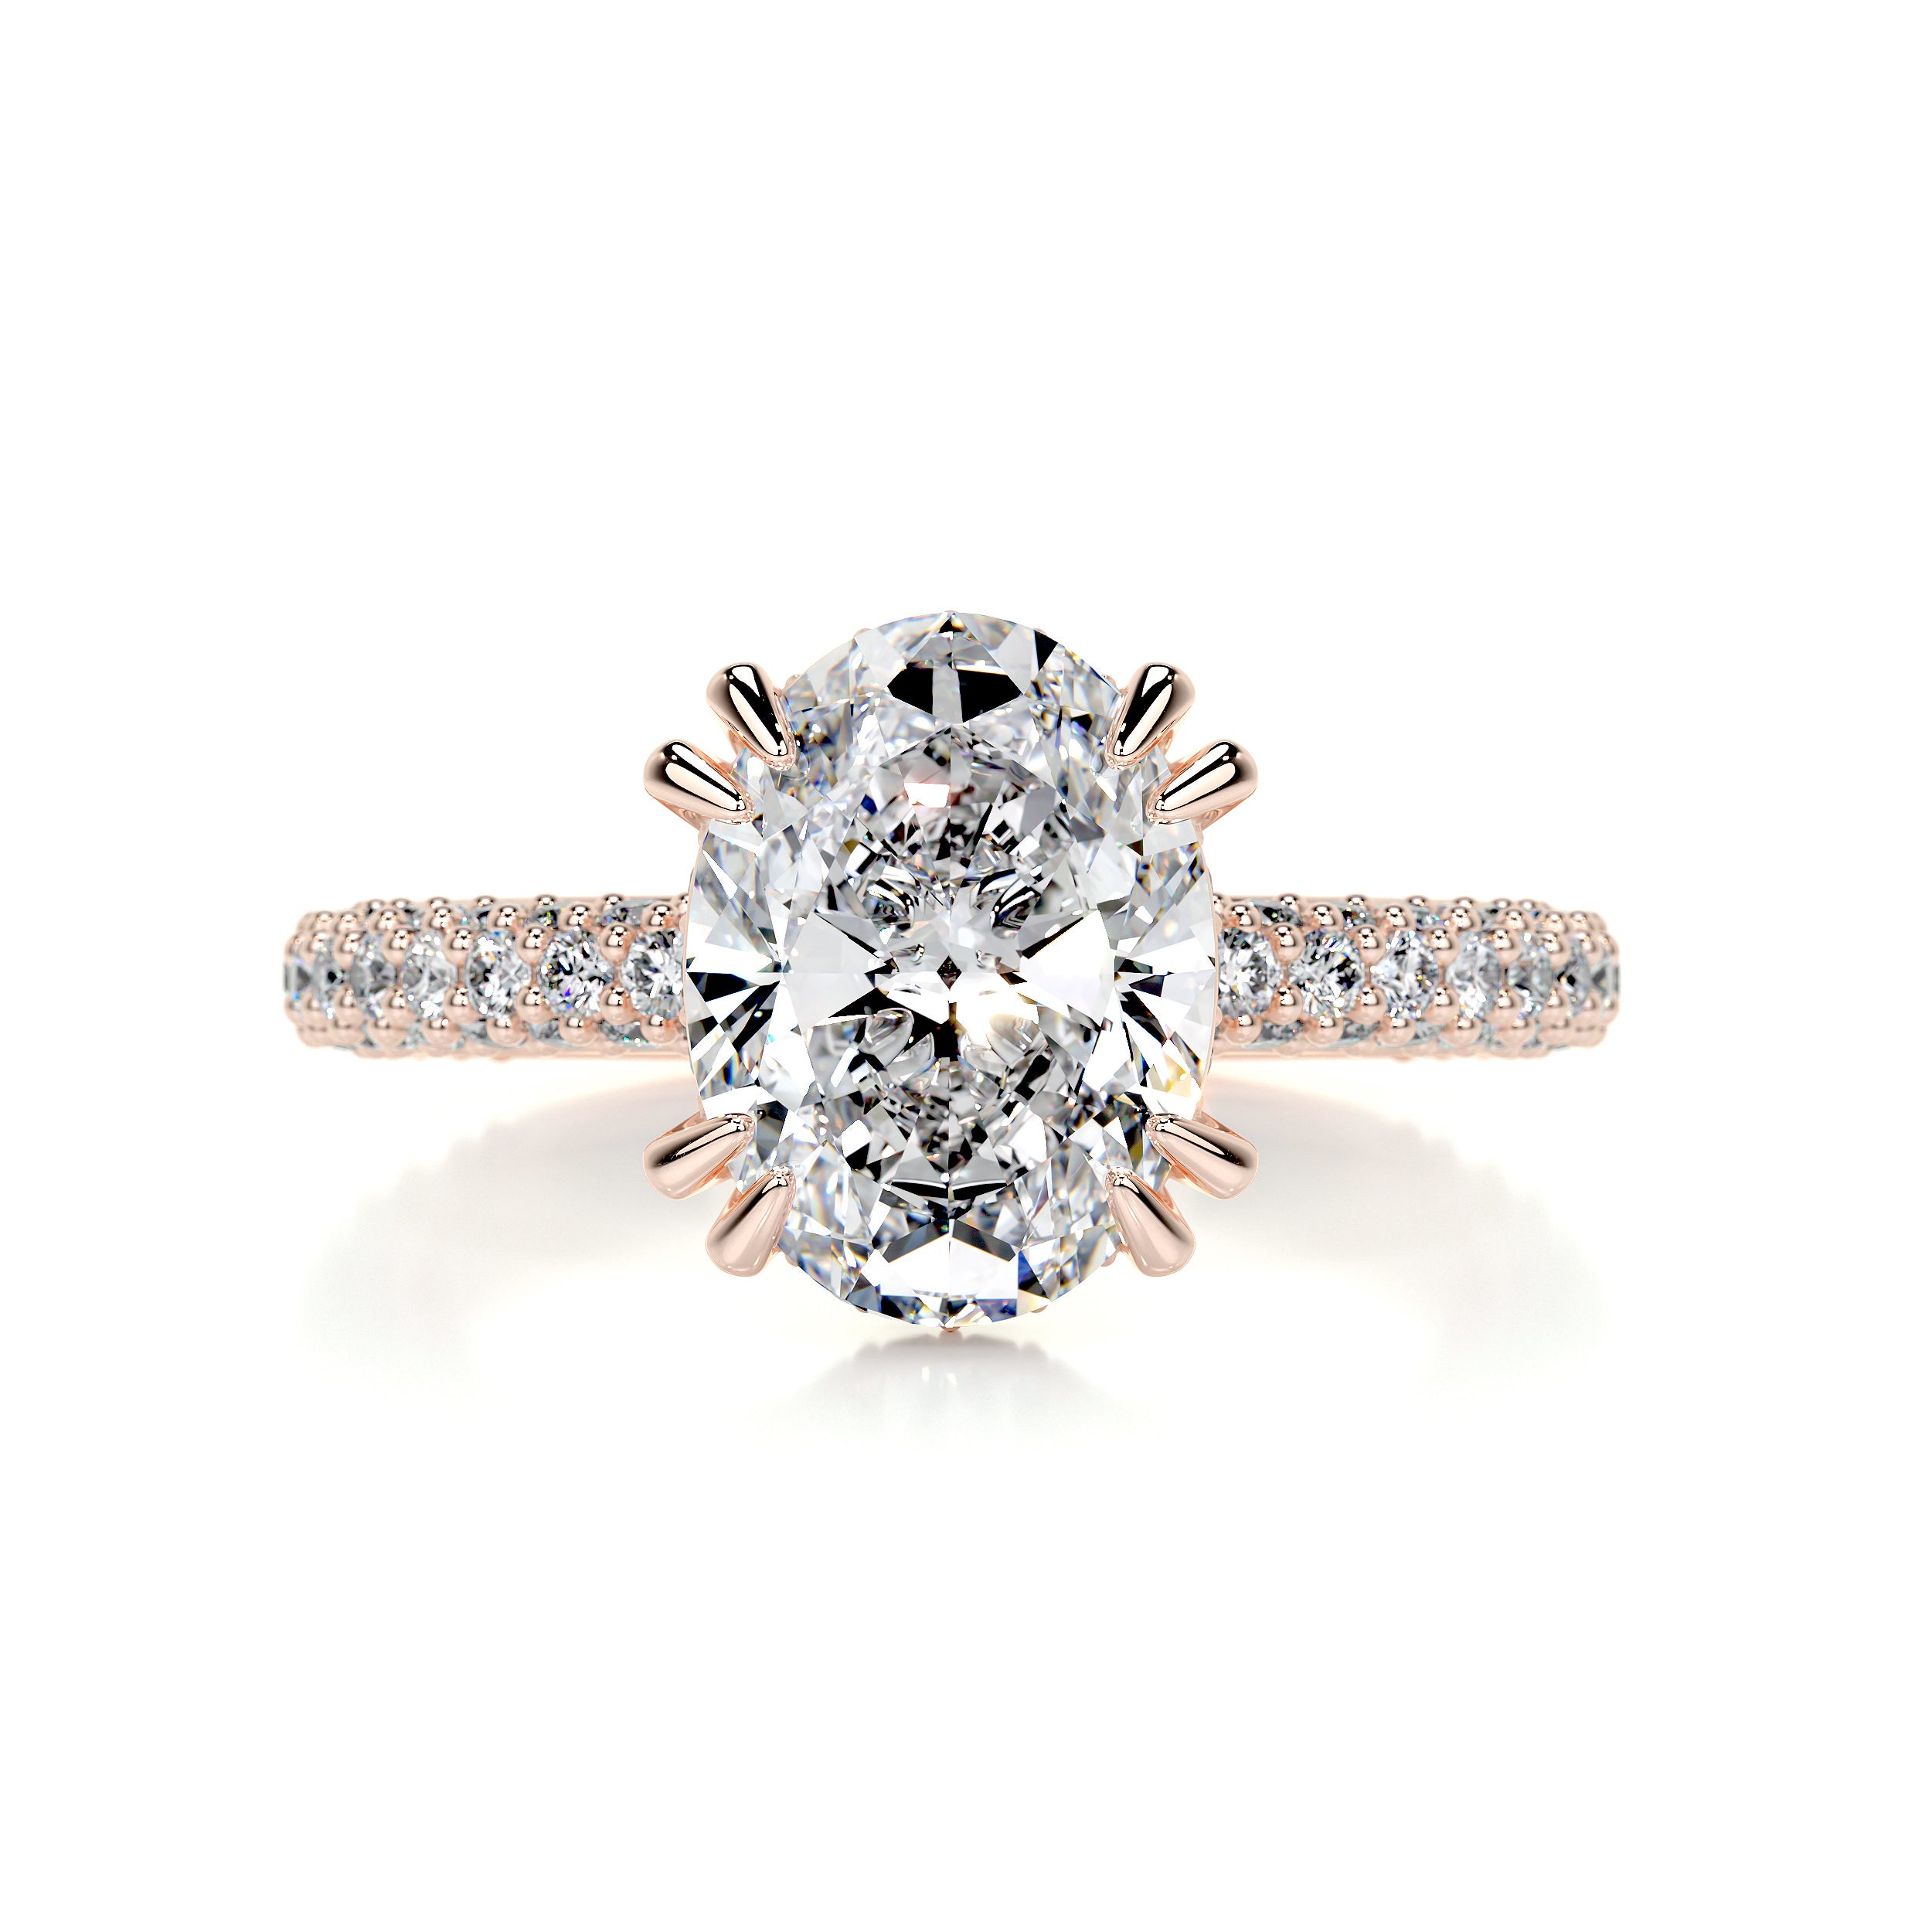 Asia: Vintage and Nature Inspired Diamond Rope Band Engagement Ring | Ken &  Dana Design